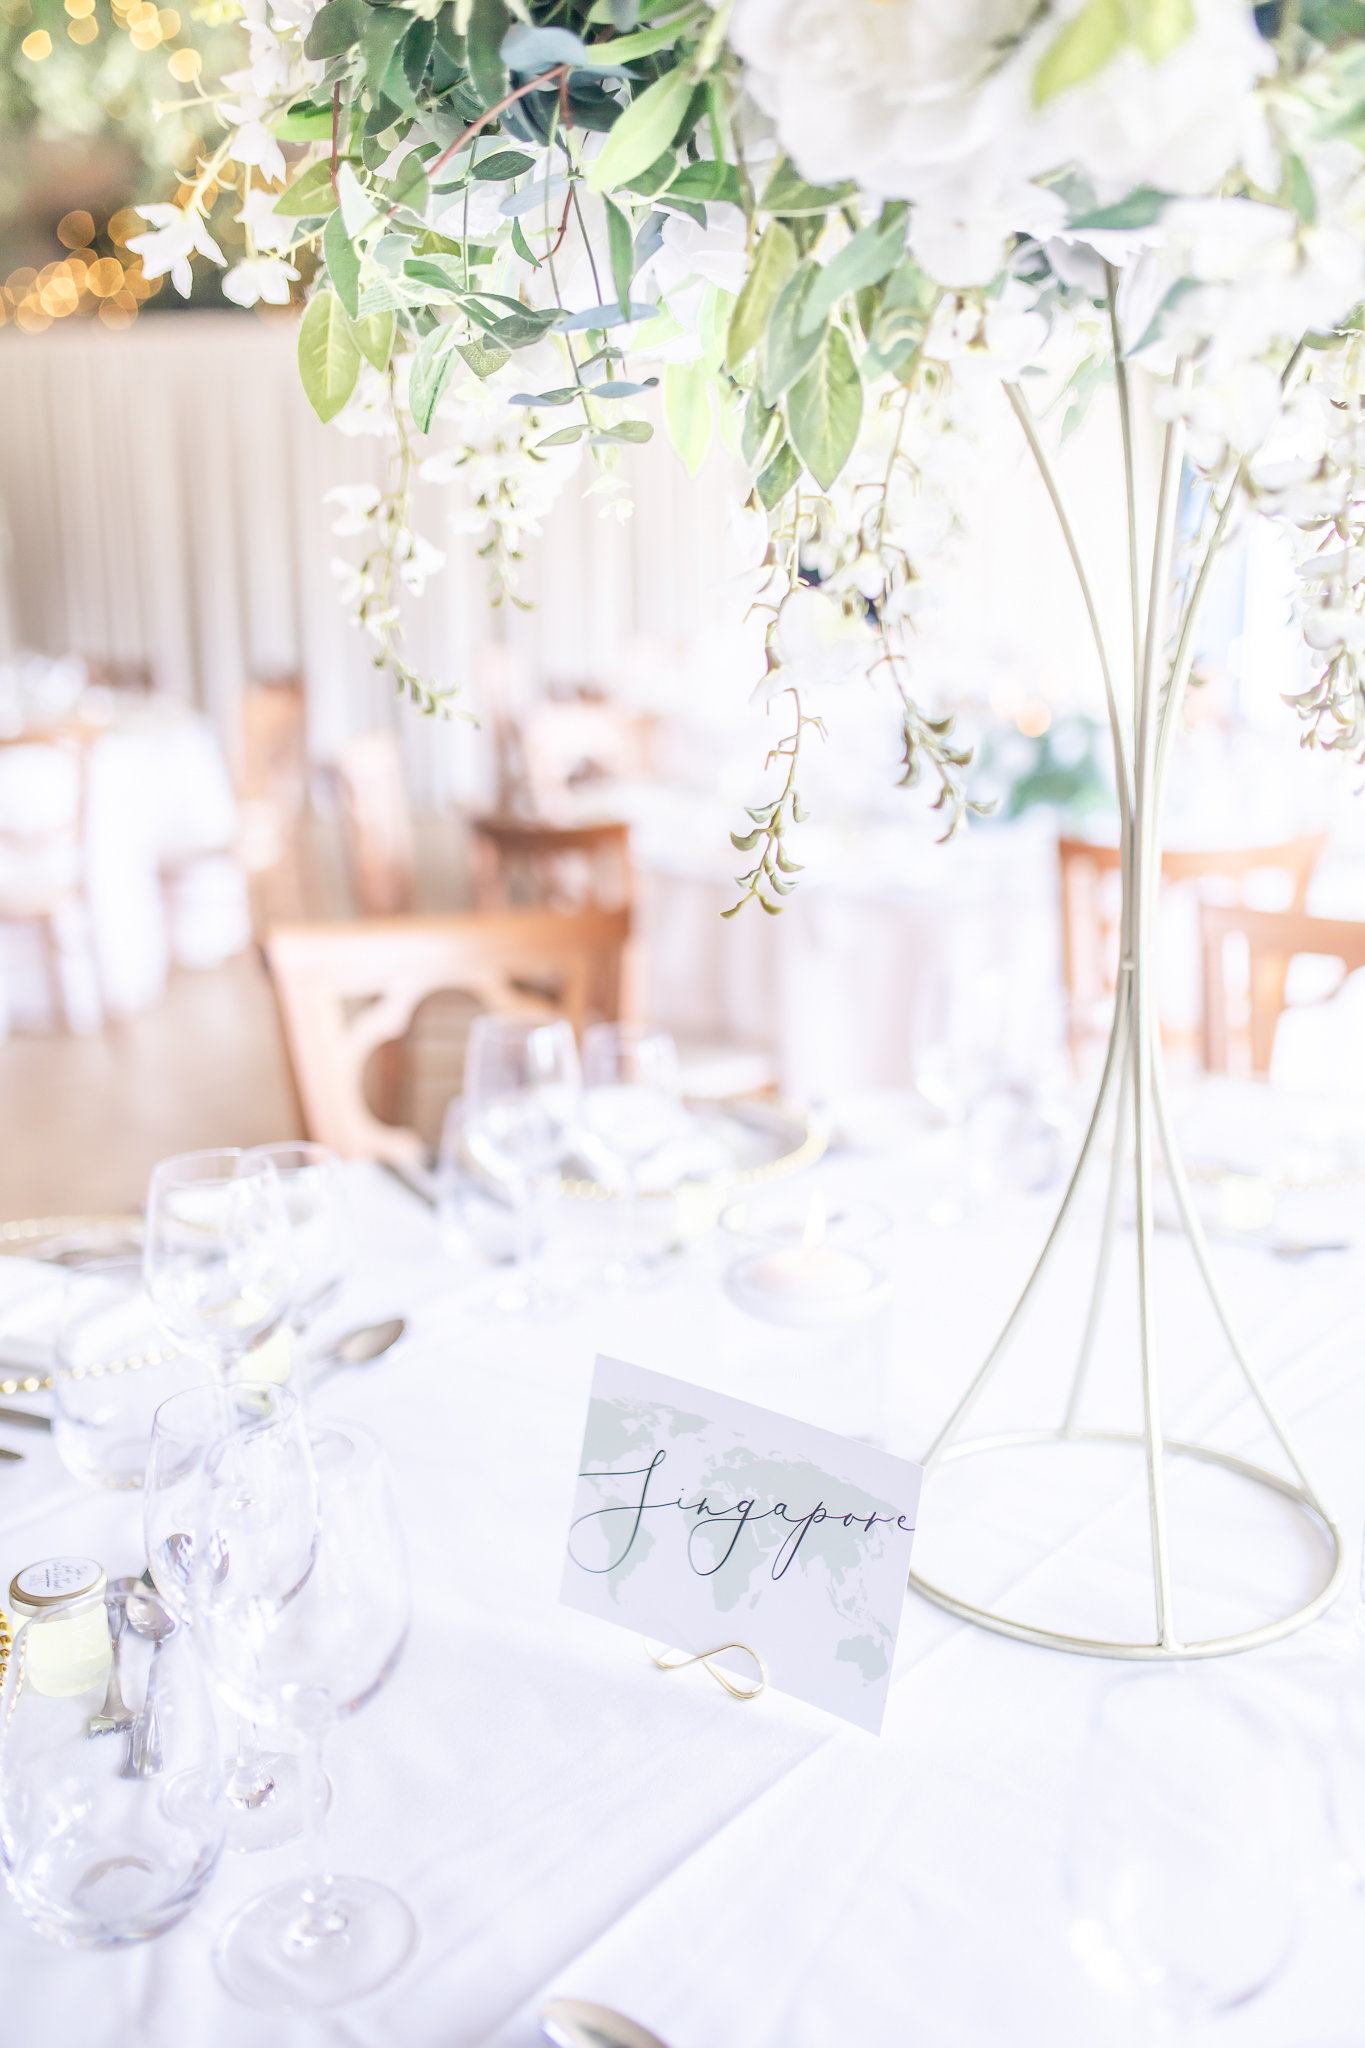 Table decorations in The Pavilion at Combermere Abbey Cheshire Wedding Venue